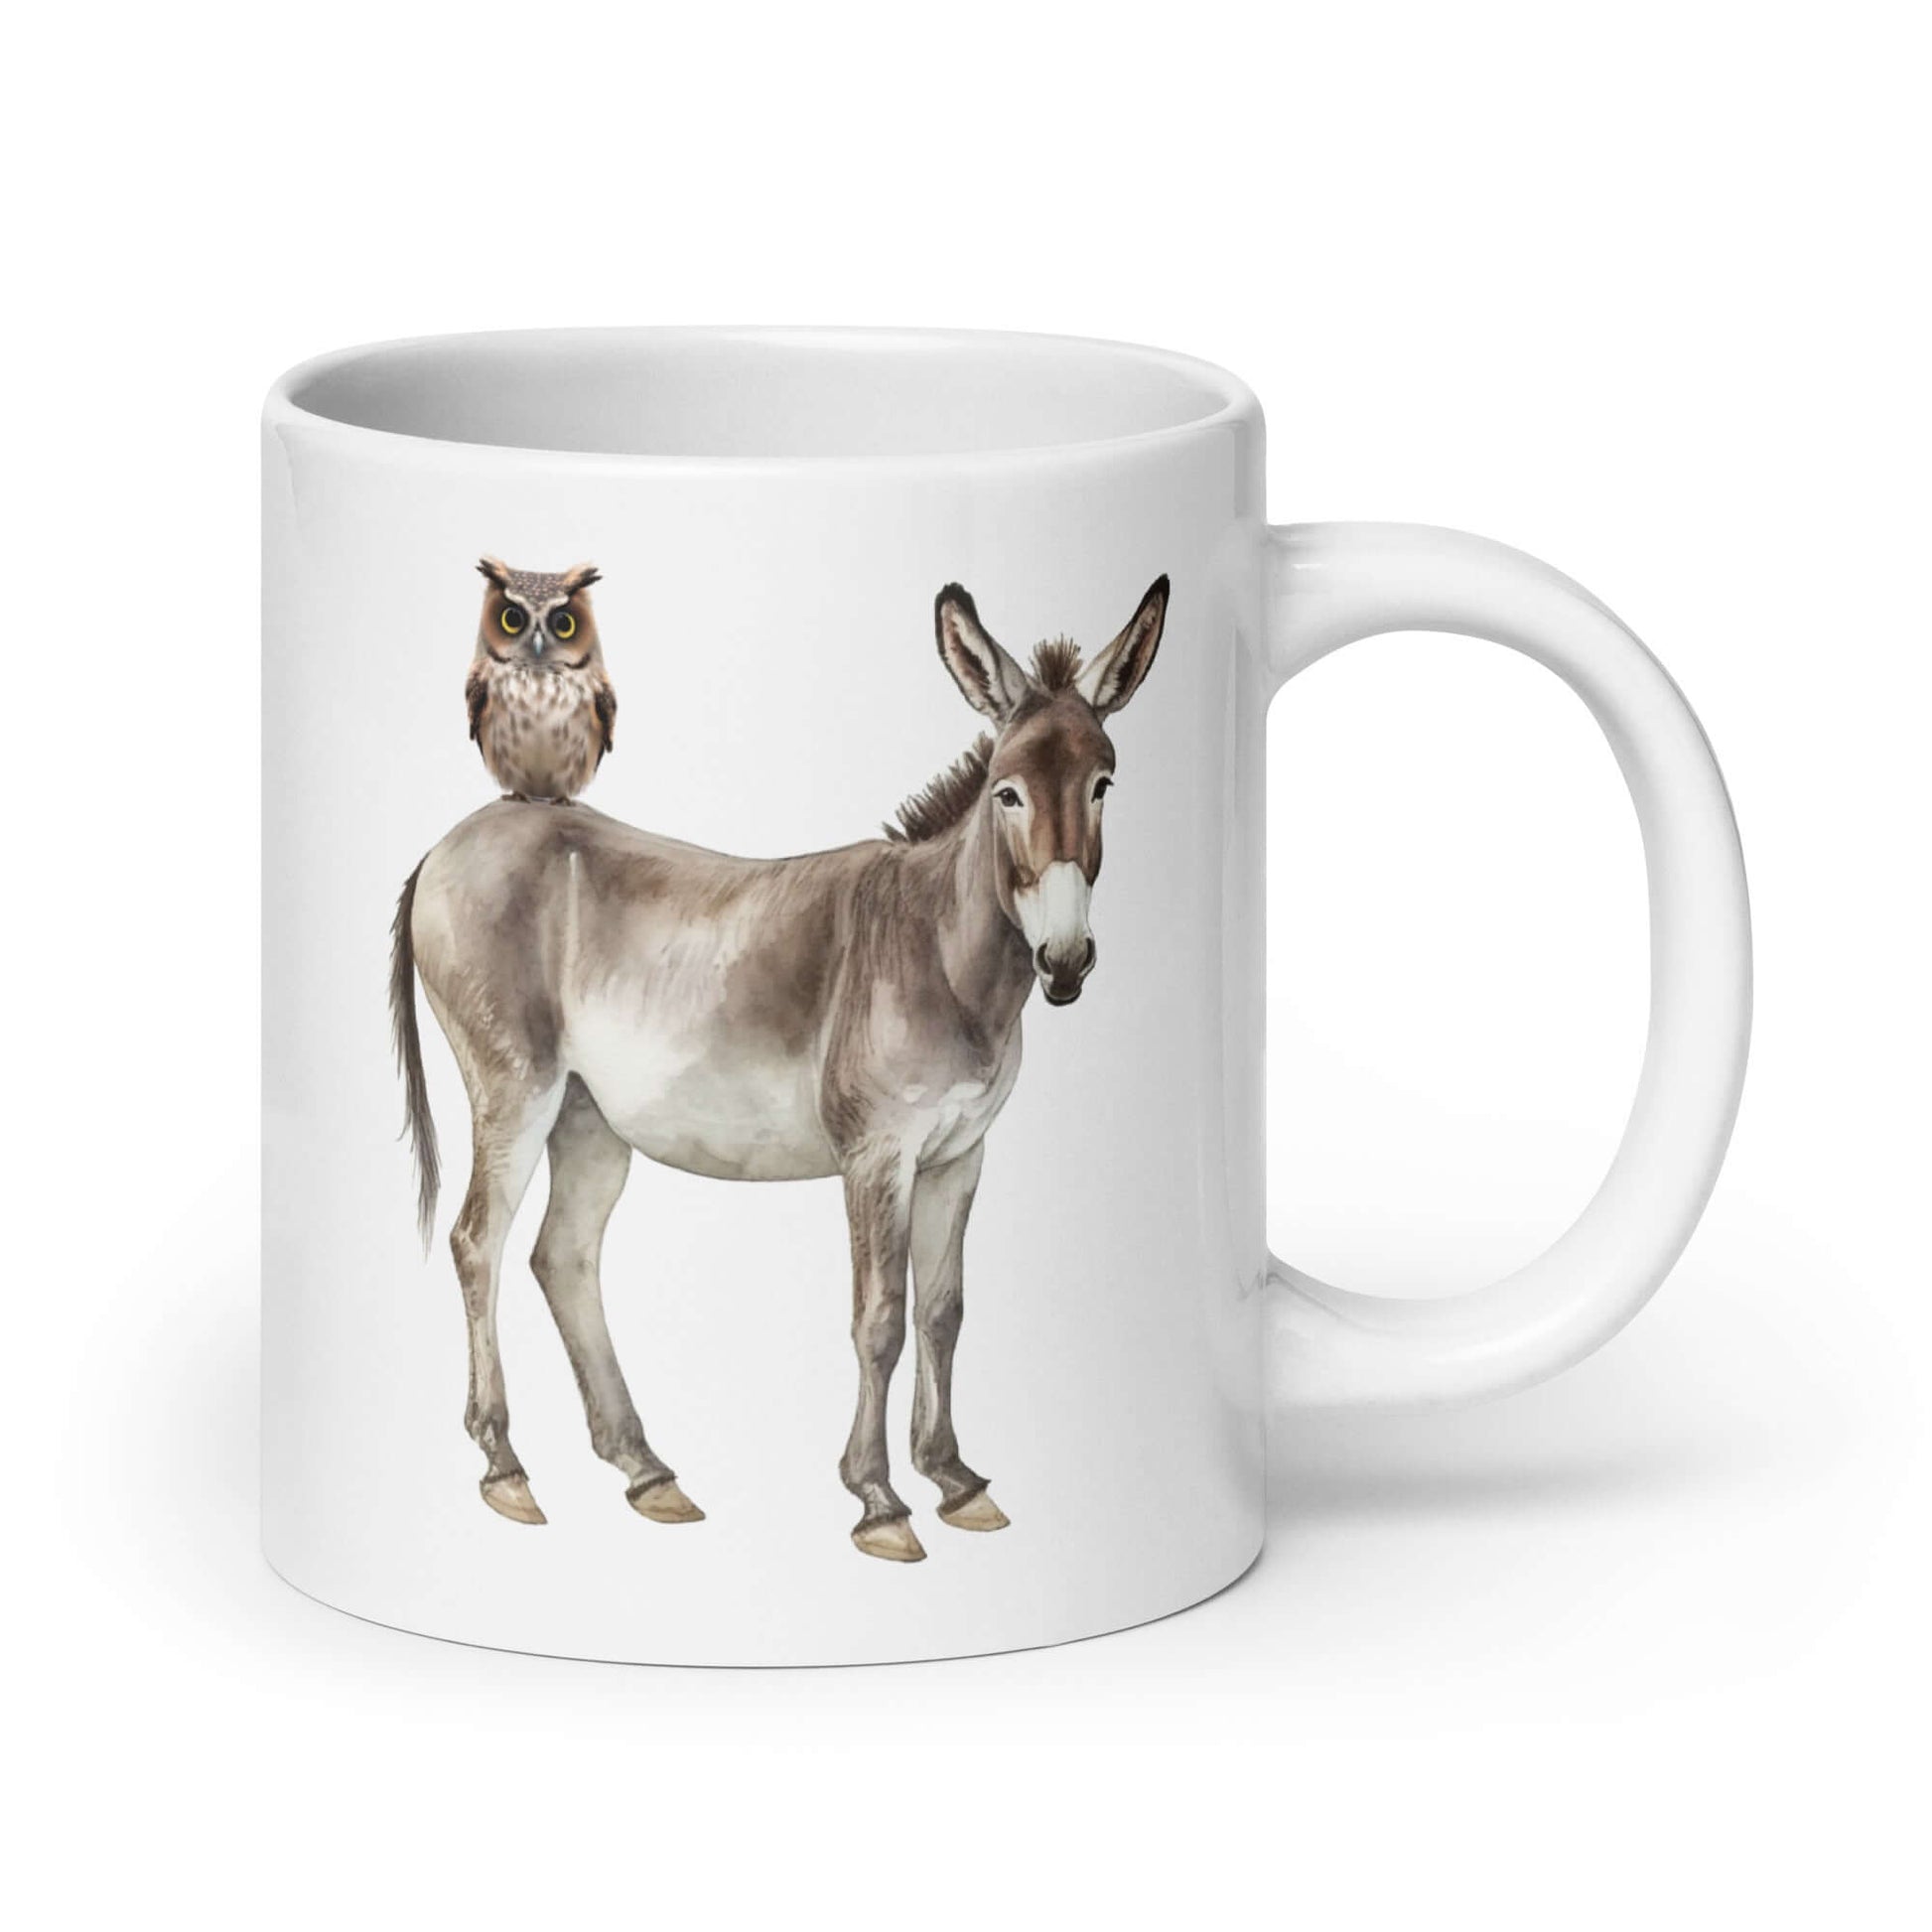 White ceramic coffee mug with an image of a donkey with wise owl sitting on it printed on both sides of the mug.